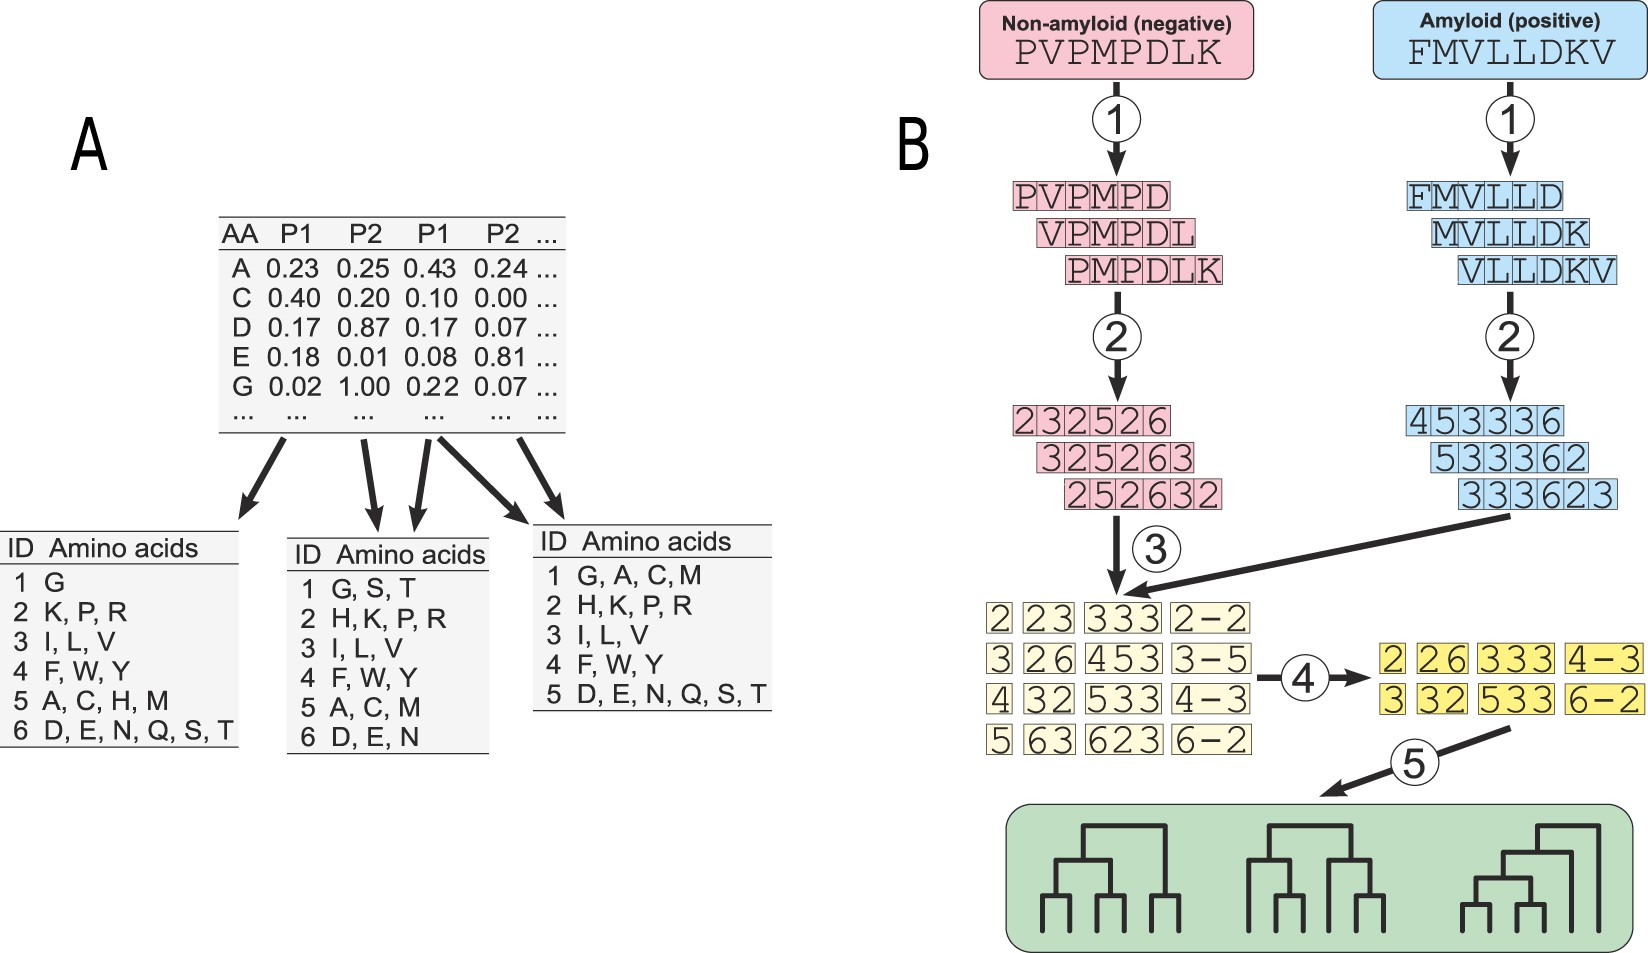 Amyloidogenic motifs revealed by n gram analysis   Scientific Reports